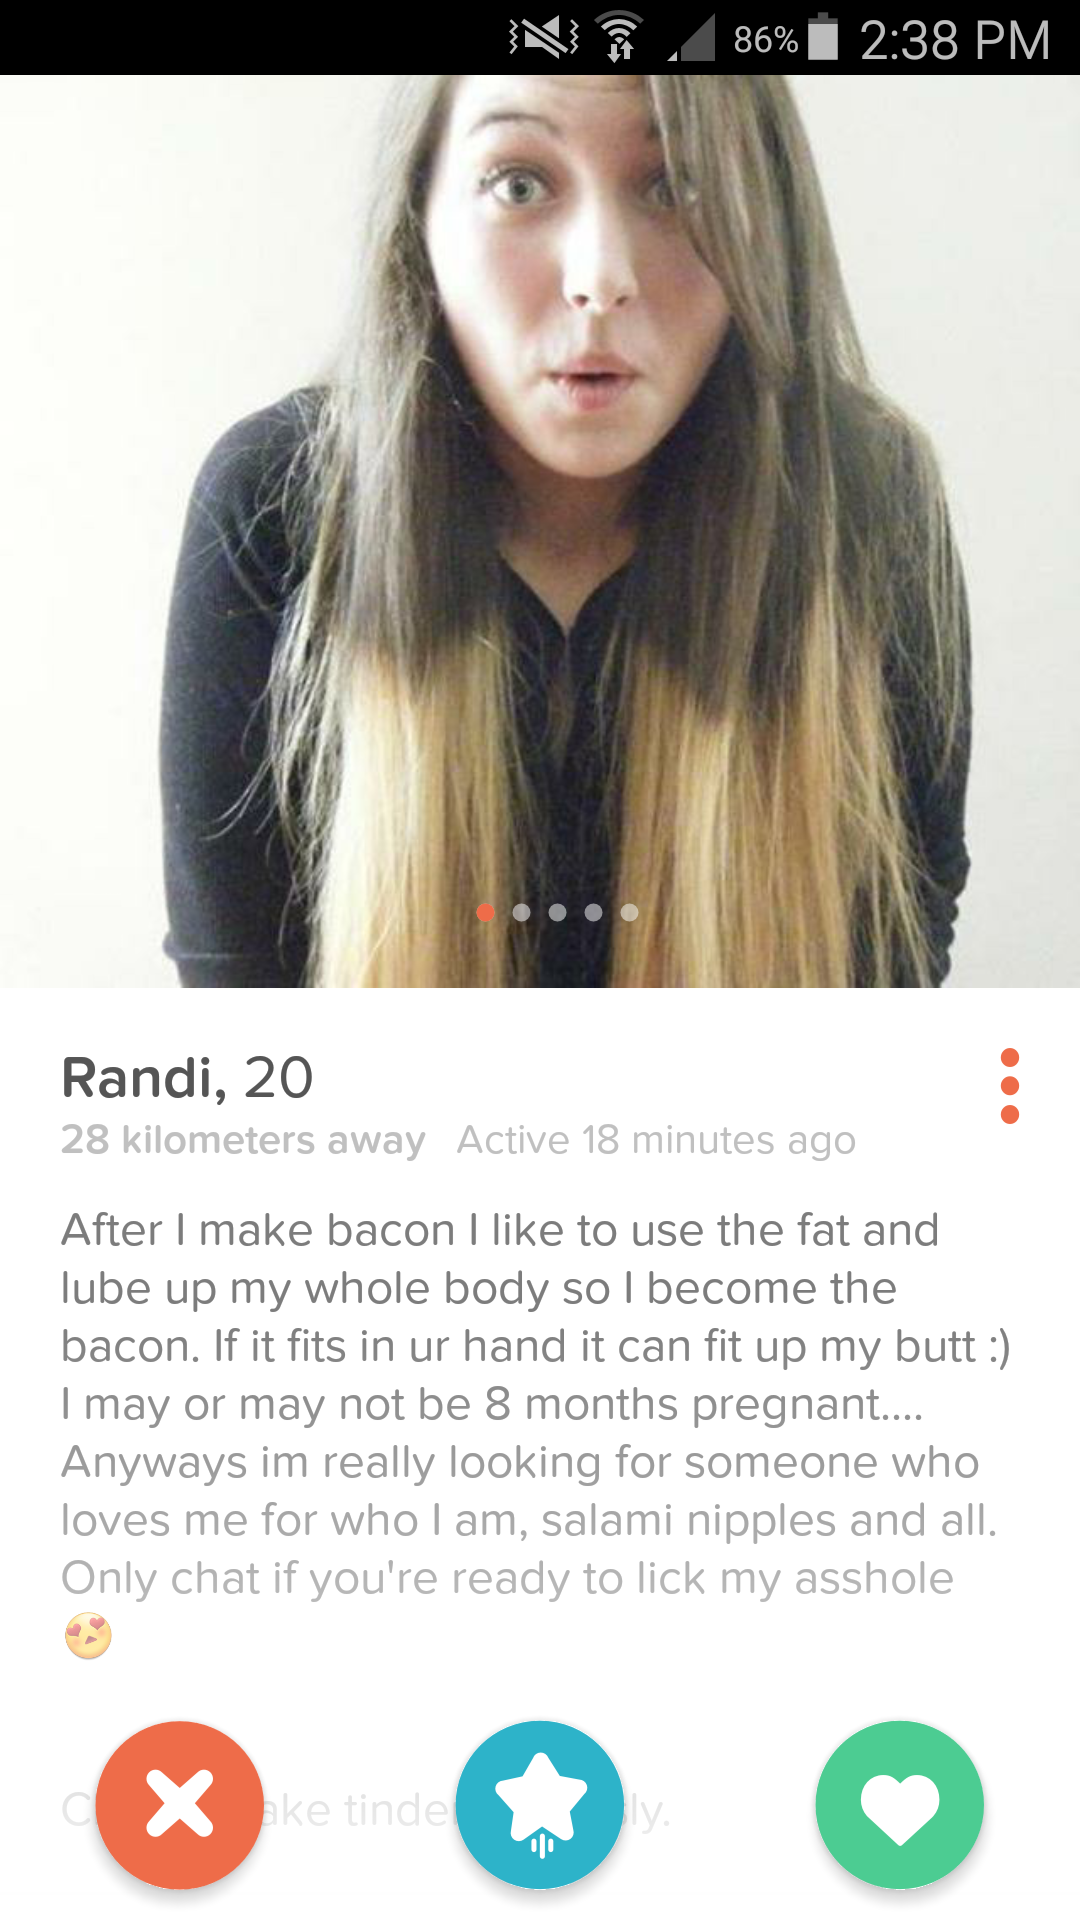 tinder - hottest tinder - N S . 86% Randi, 20 28 kilometers away Active 18 minutes ago After I make bacon I to use the fat and lube up my whole body so I become the bacon. If it fits in ur hand it can fit up my butt I may or may not be 8 months pregnant..